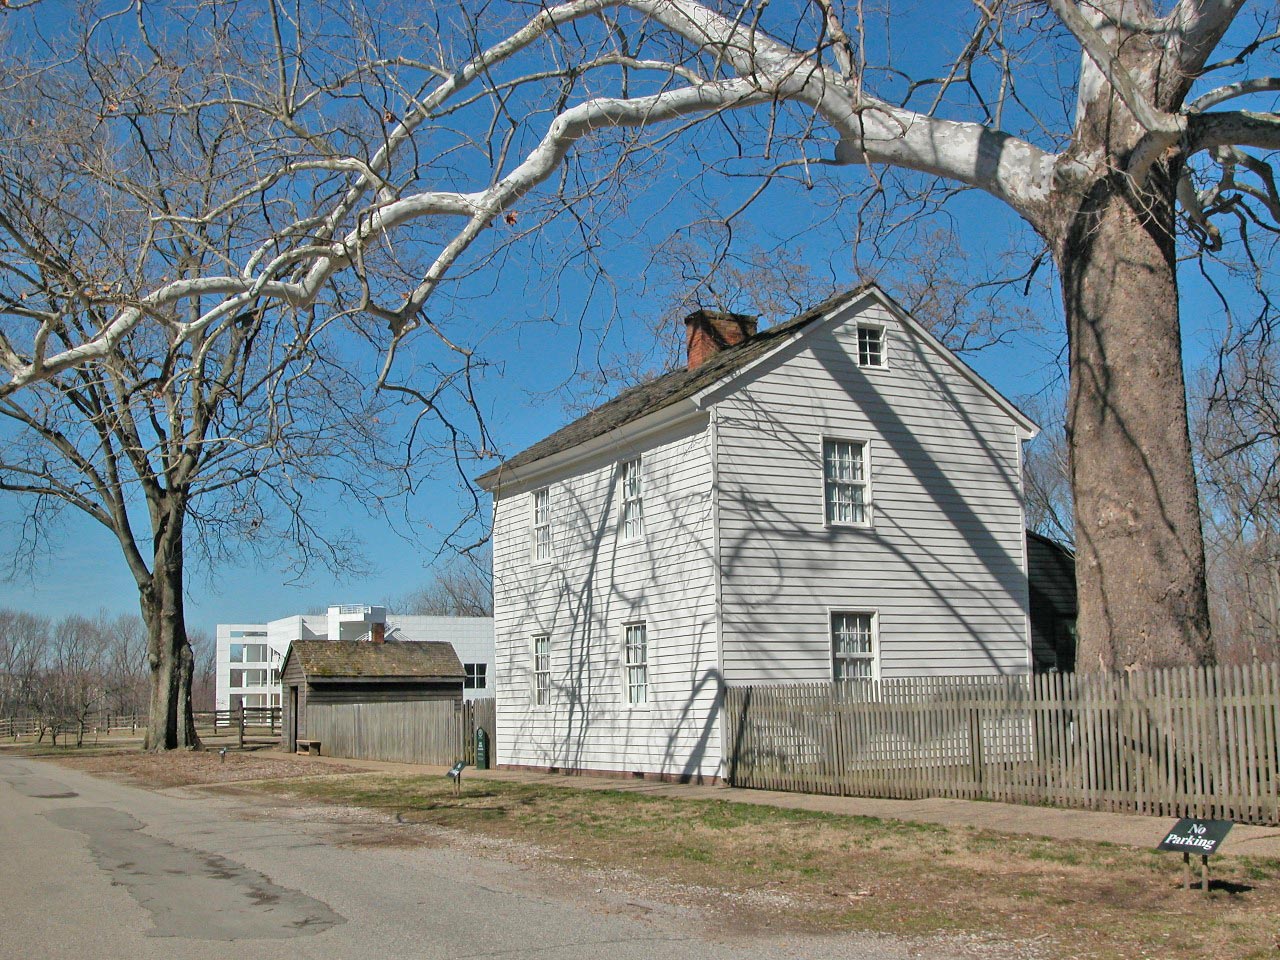 The 1822 Harmony Society House, one of the buildings that interprets the history of the town’s two founding utopian communities